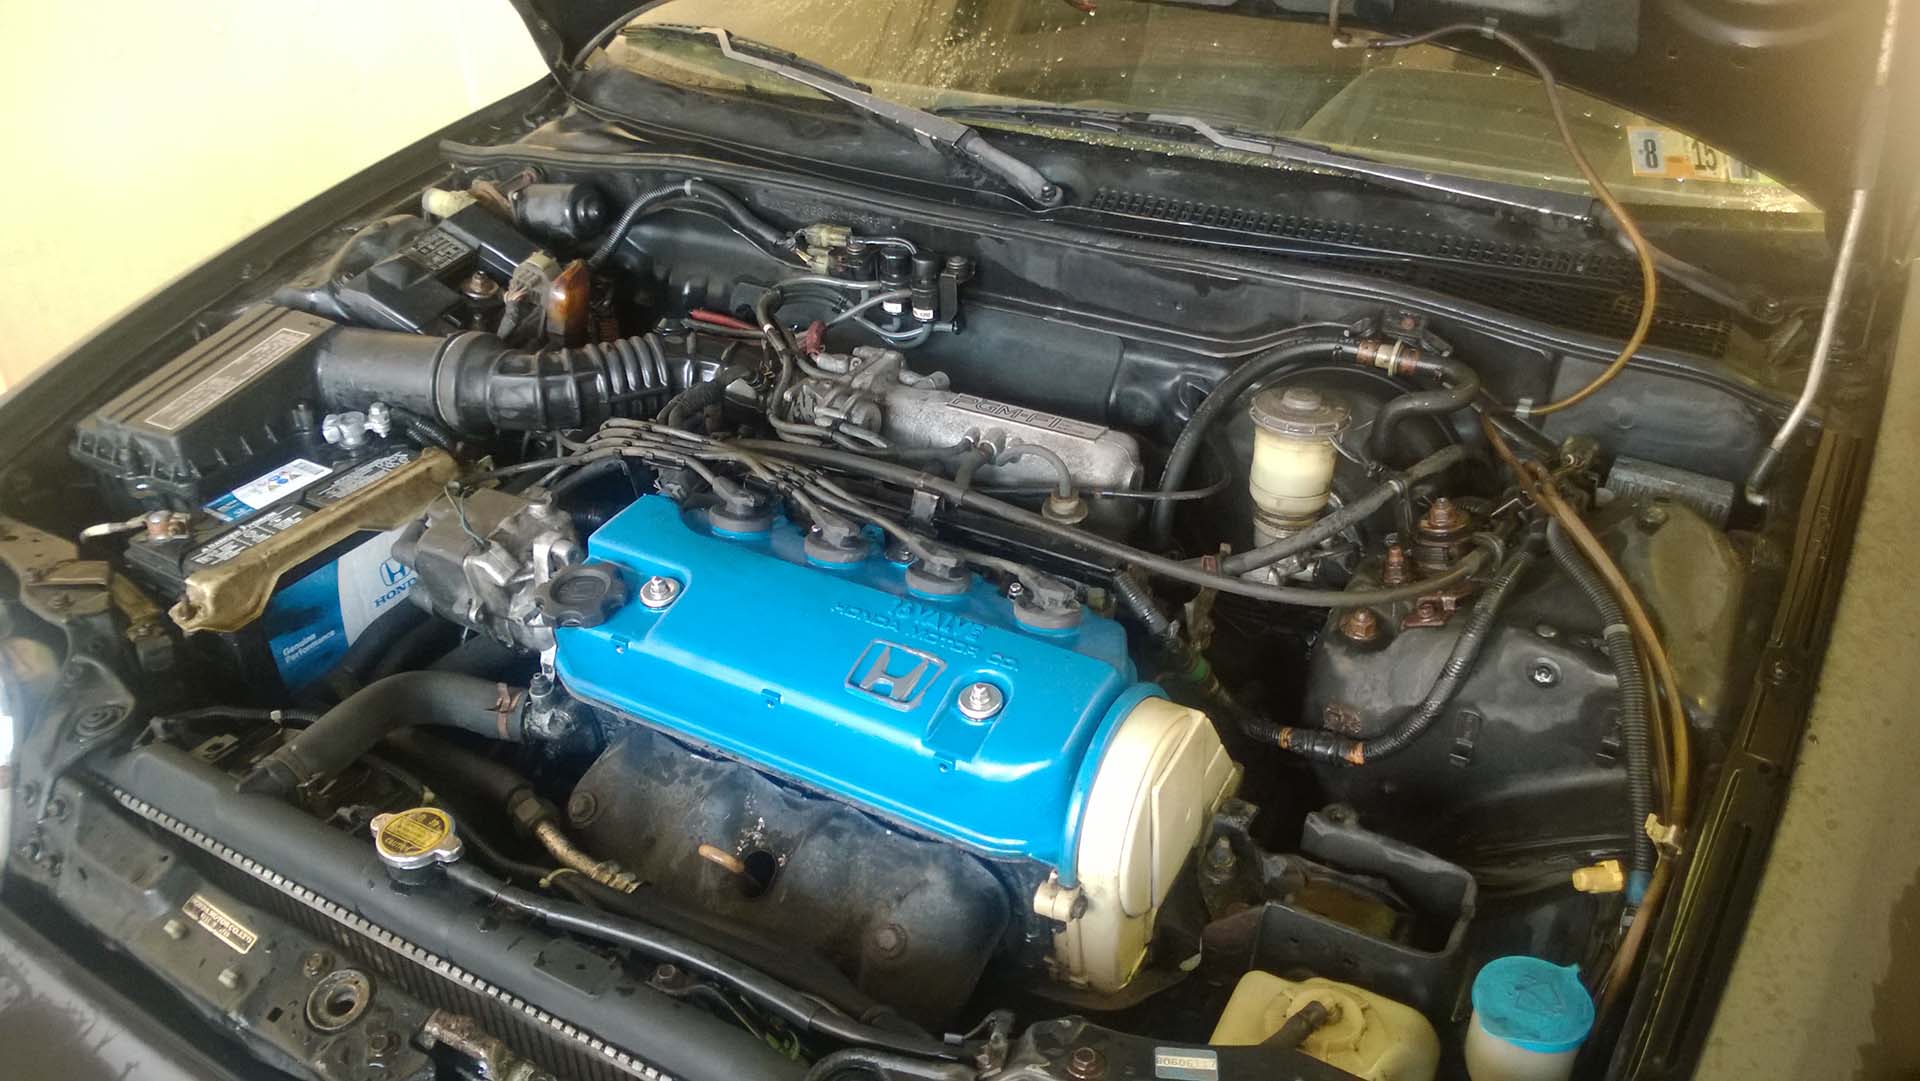 Engine Bay Cleaned and Degreased